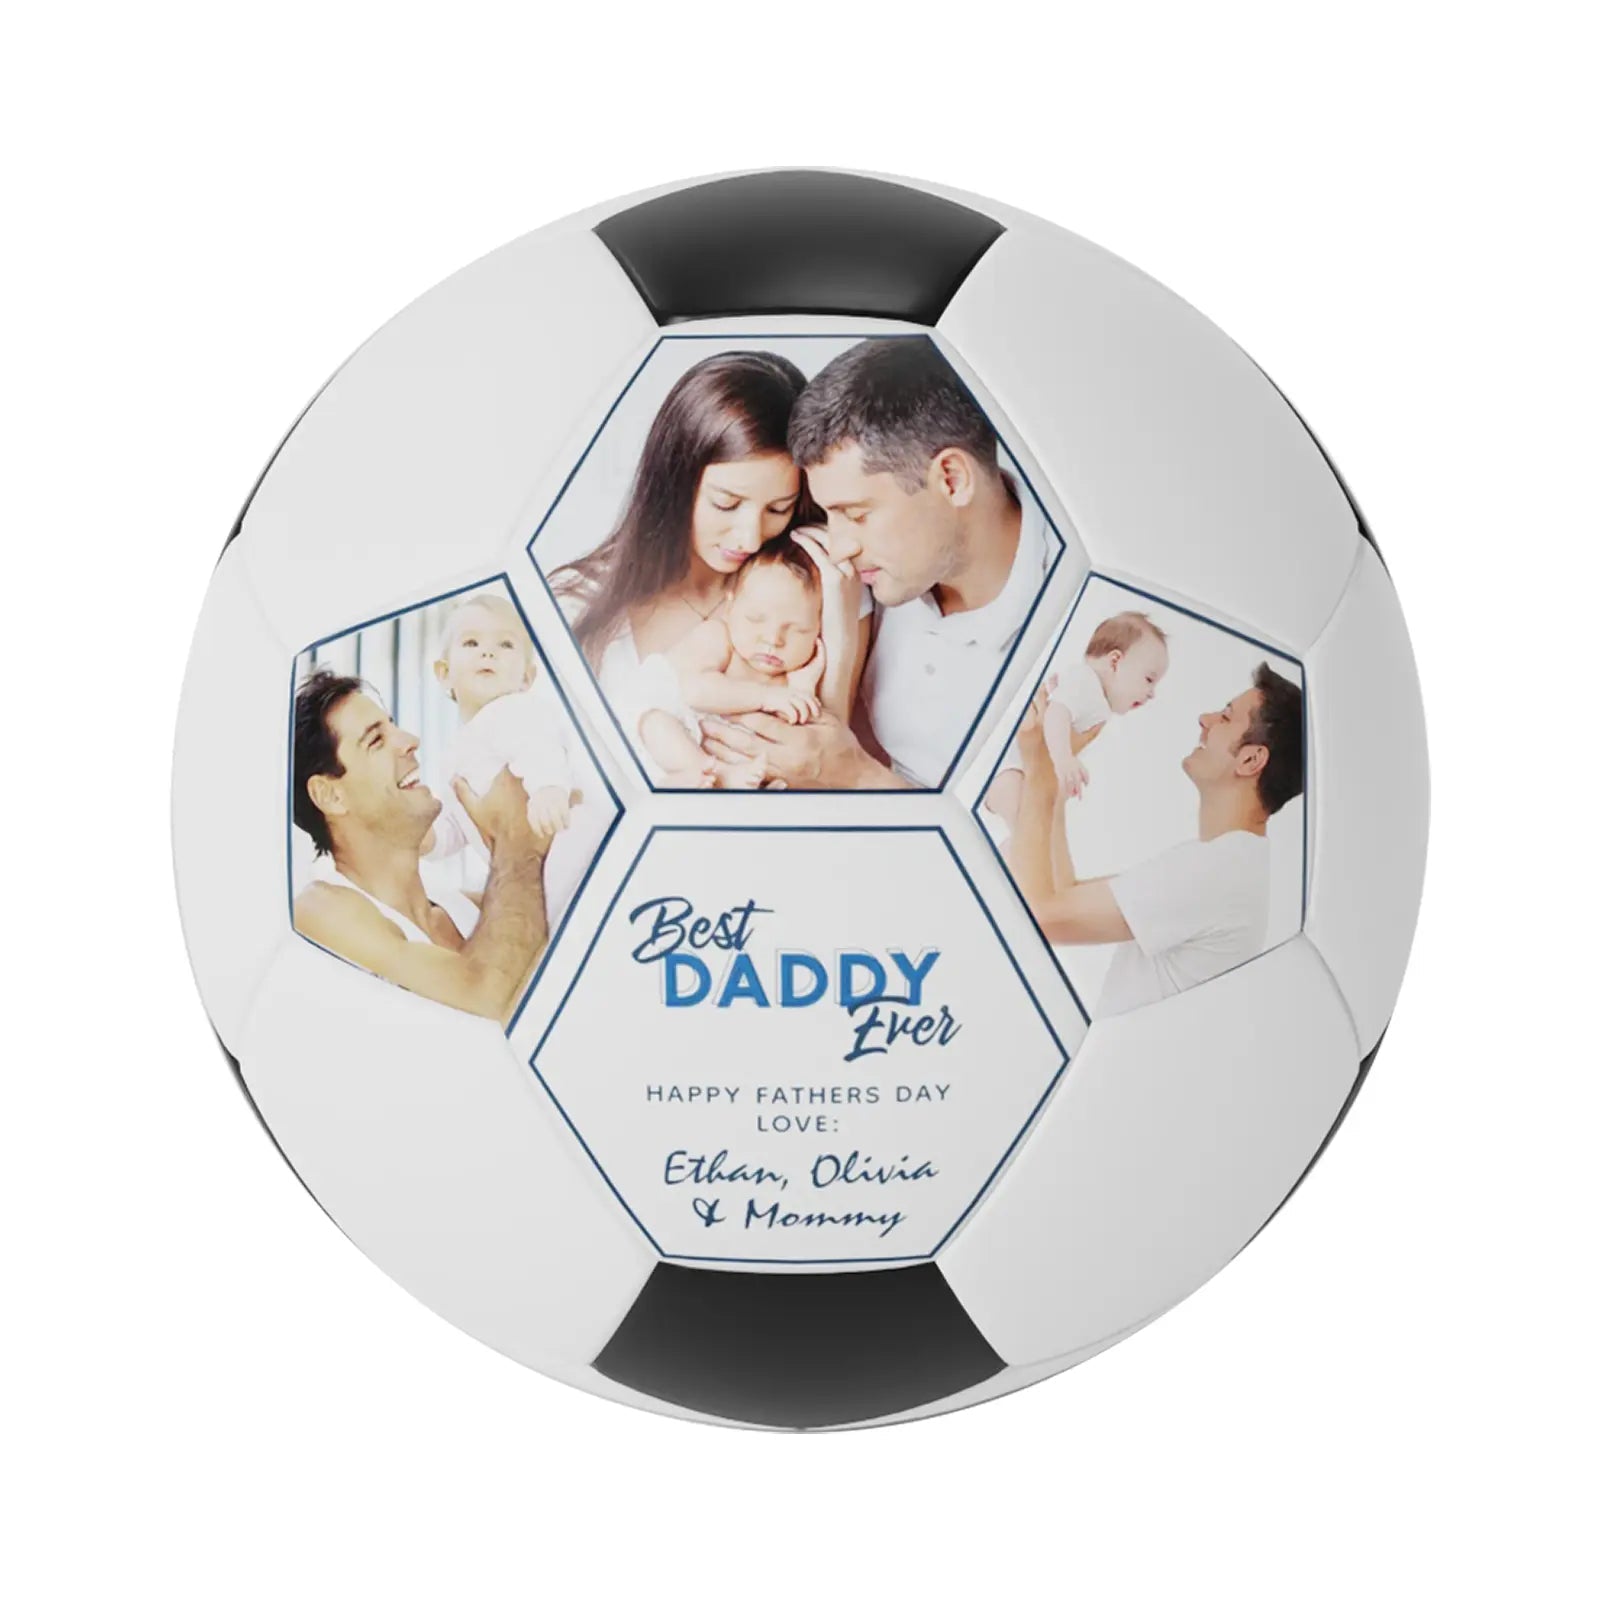 Personalized Custom Best Daddy Ever Soccer Ball Gifts For Dad,Grandpa - Family Watchs